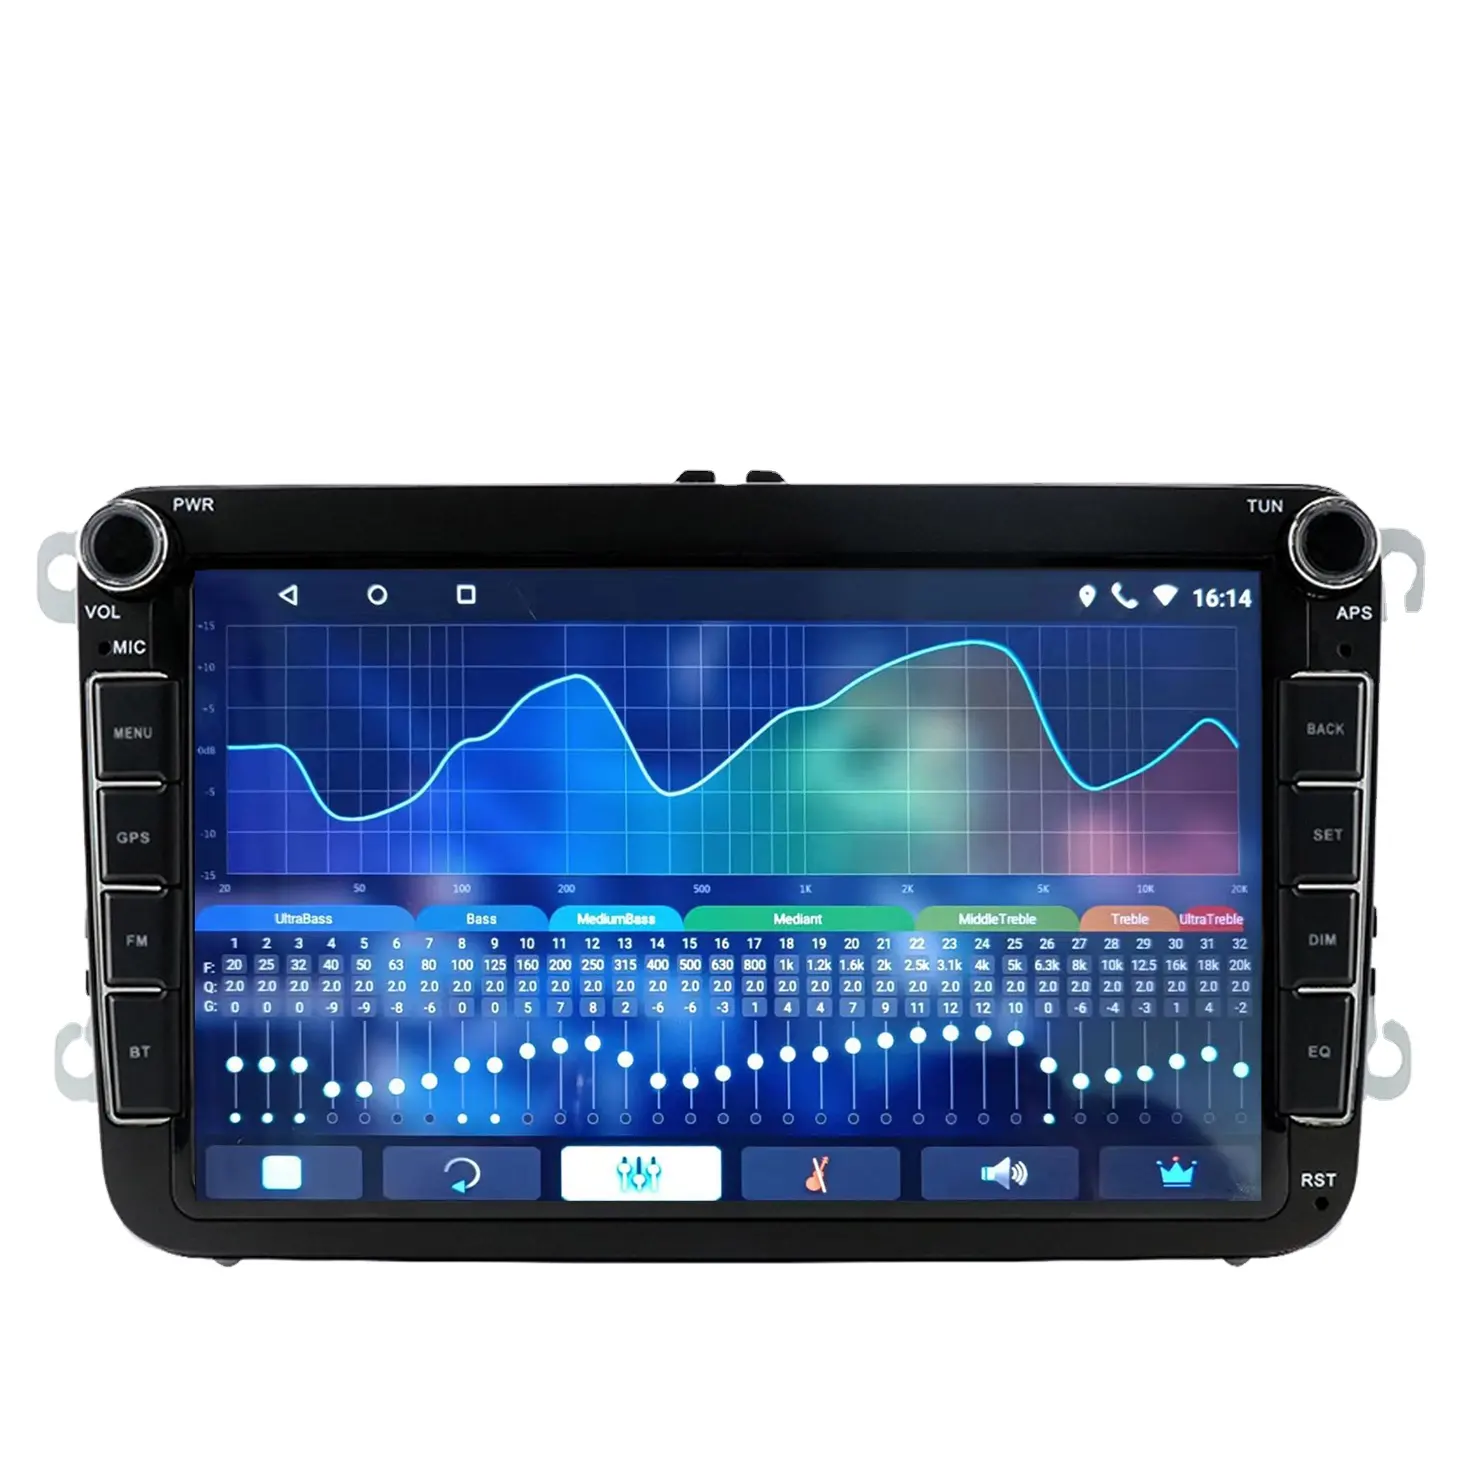 8 inch Car Radio Android 10 GPS Stereo for VW Passat Golf MK5 Jetta Tiguan T5 Skoda Seat Polo Touran 2 Din Car Stereo with BT